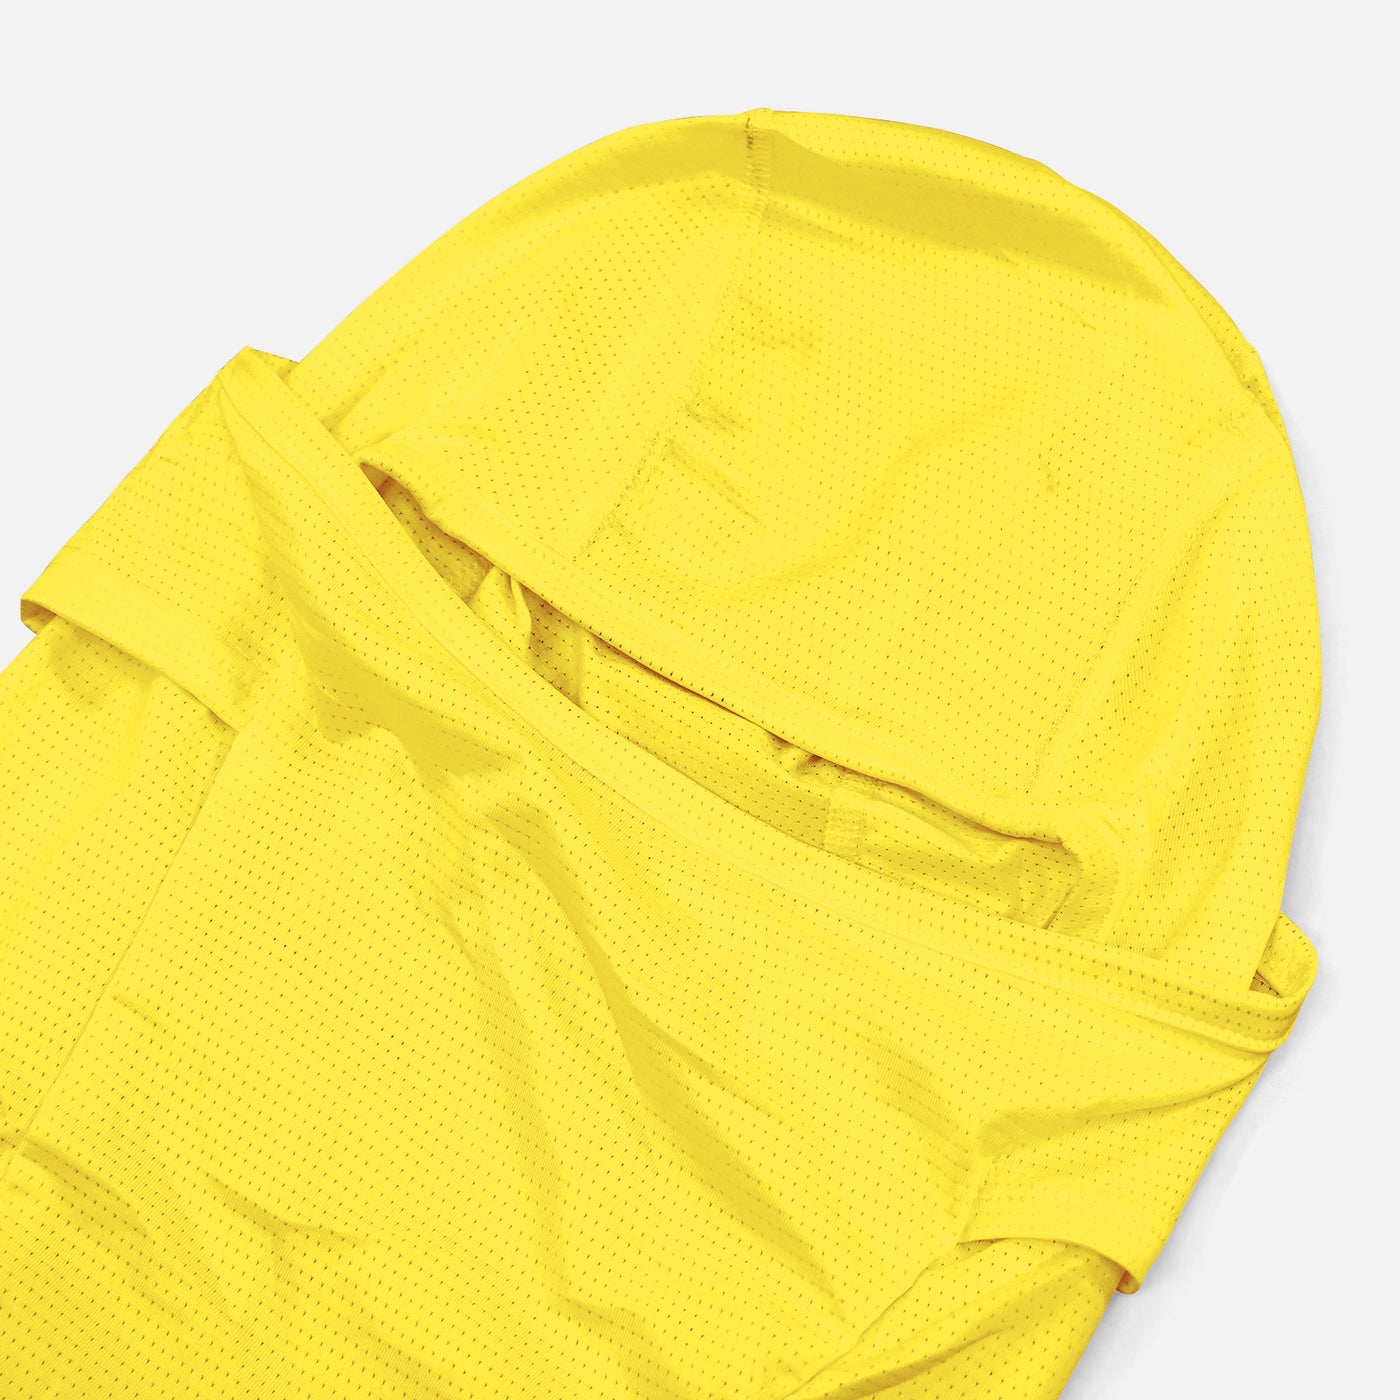 Canary Yellow Loose-fitting Shiesty Mask